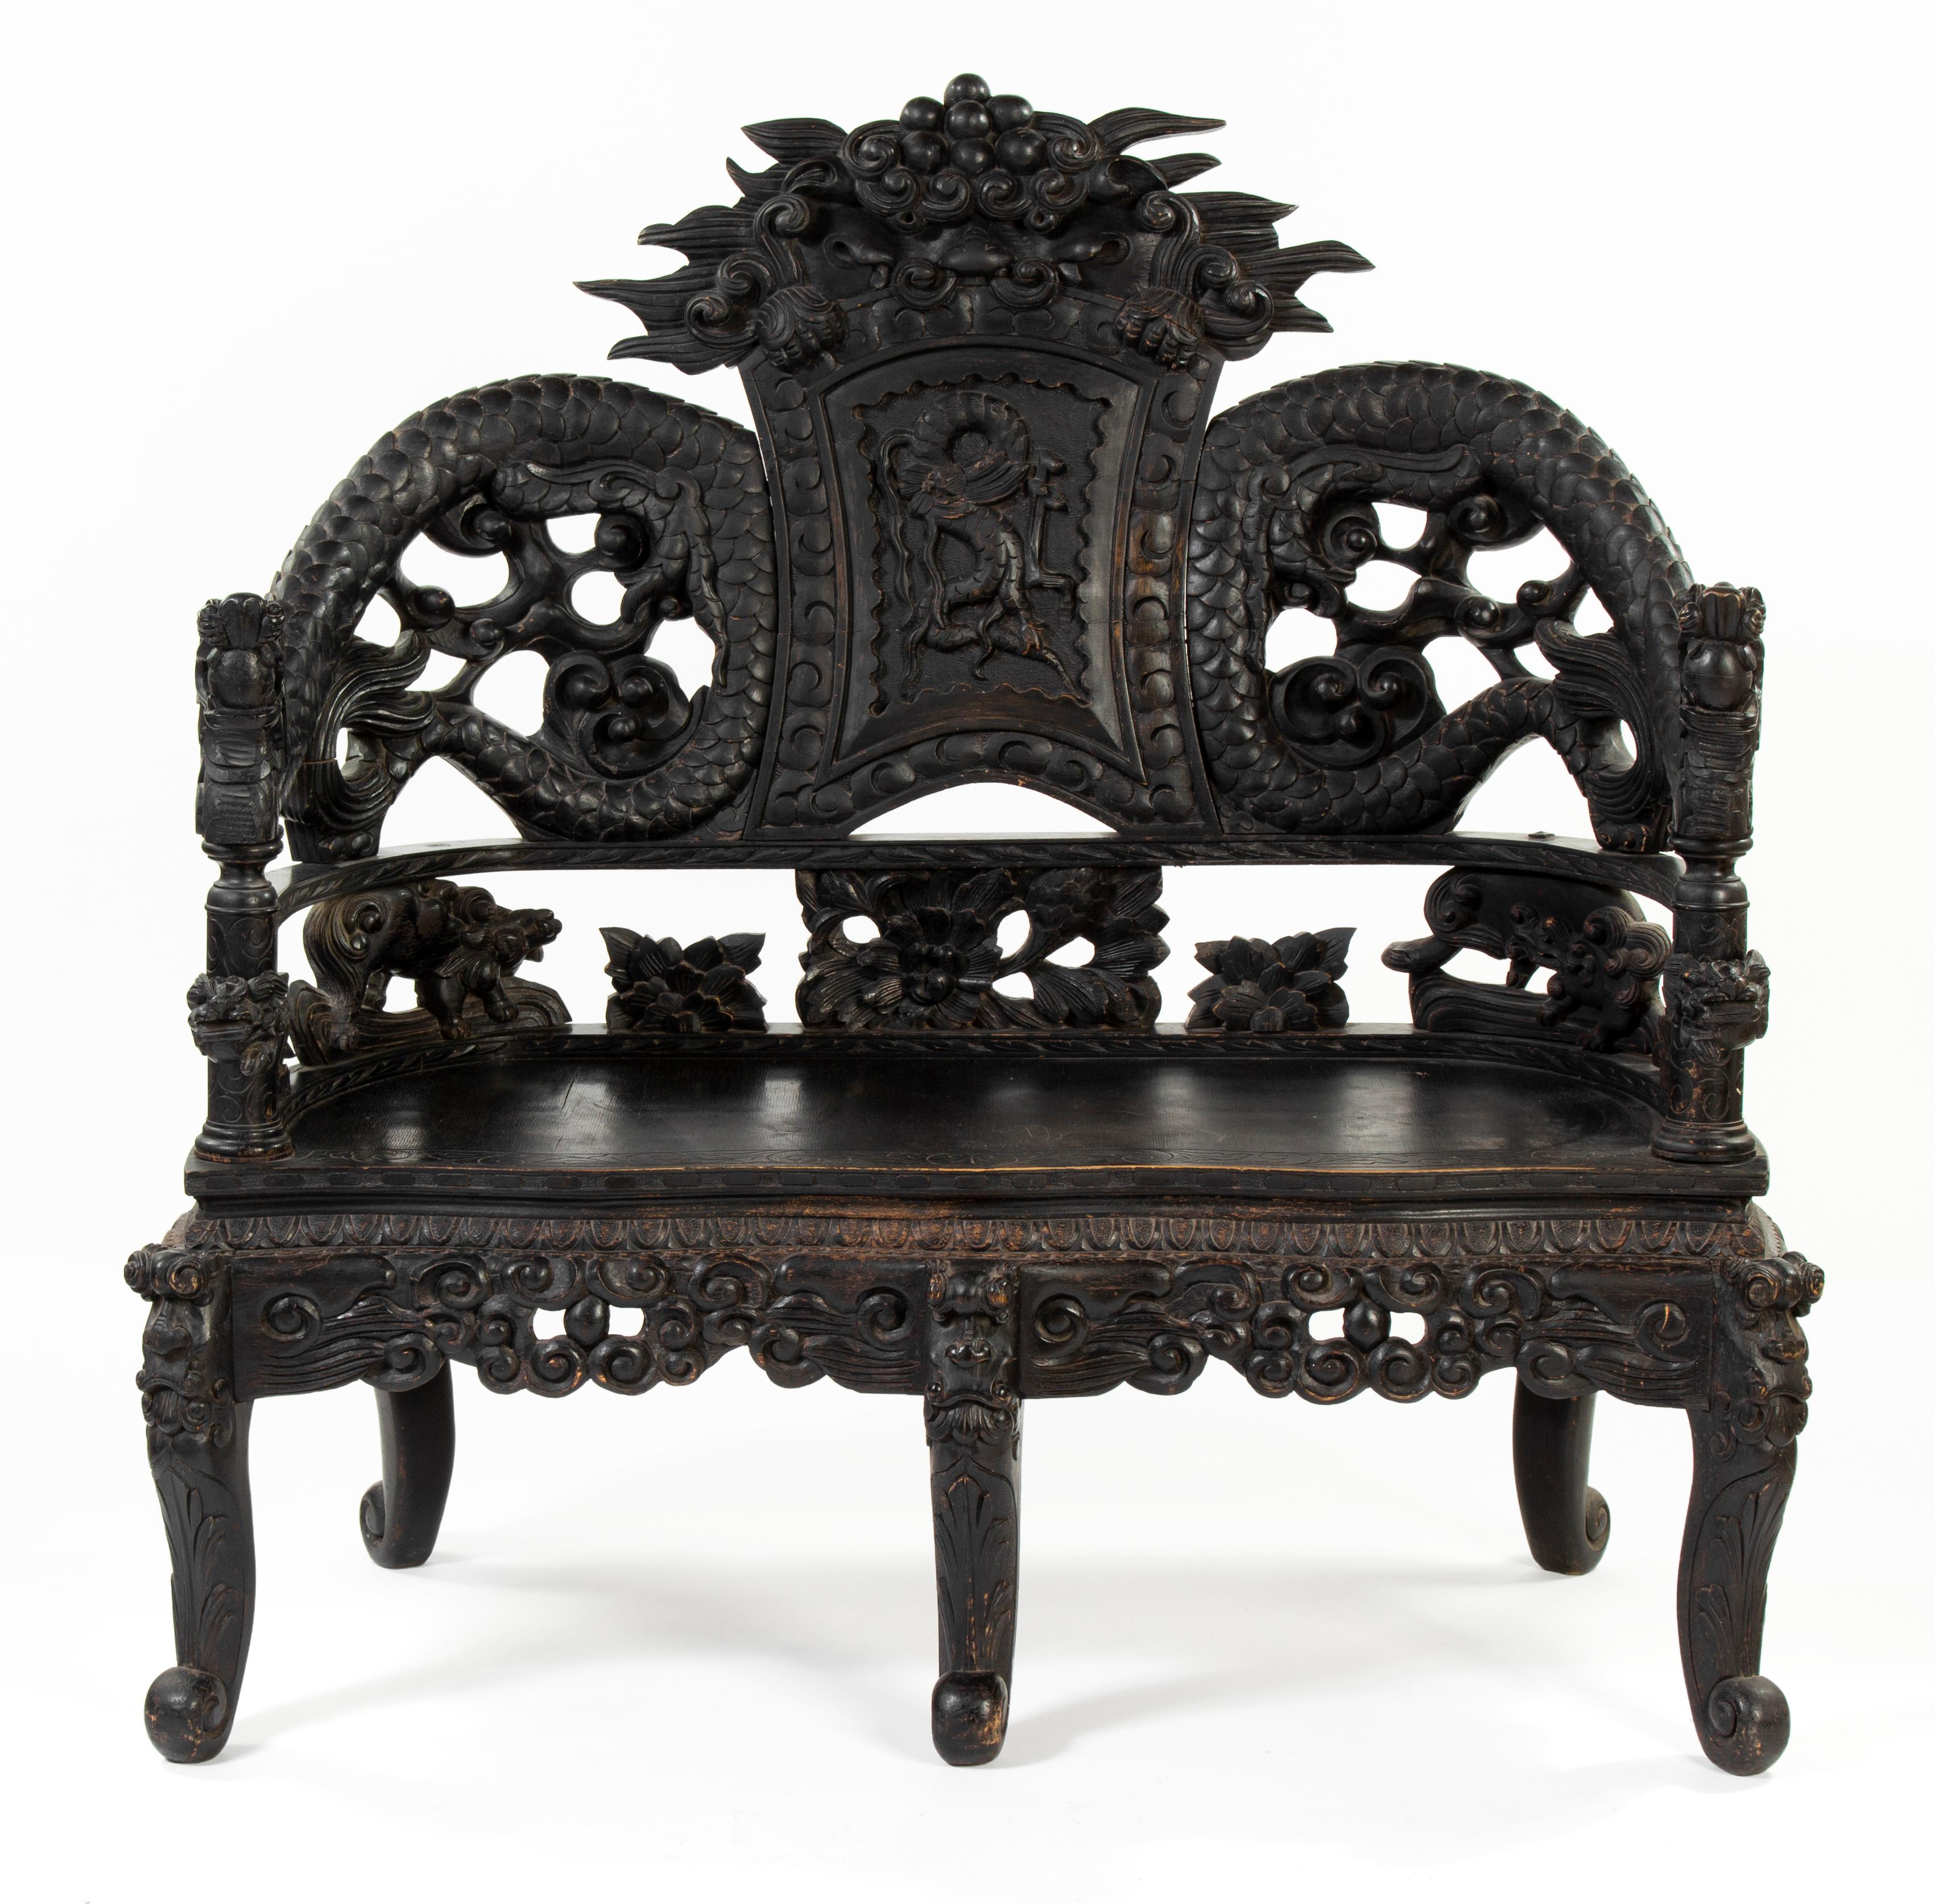 Chinese carved wood living room set, consisting of one table, two armchairs and one couch.

Table
Diameter: 60 cm
Height: 67 cm

Armchairs (2x)
Width: 66 cm
Depth: 60 cm
Height: 93 cm
Seat height: 48 cm

Couch
Width: 125 cm
Depth: 60